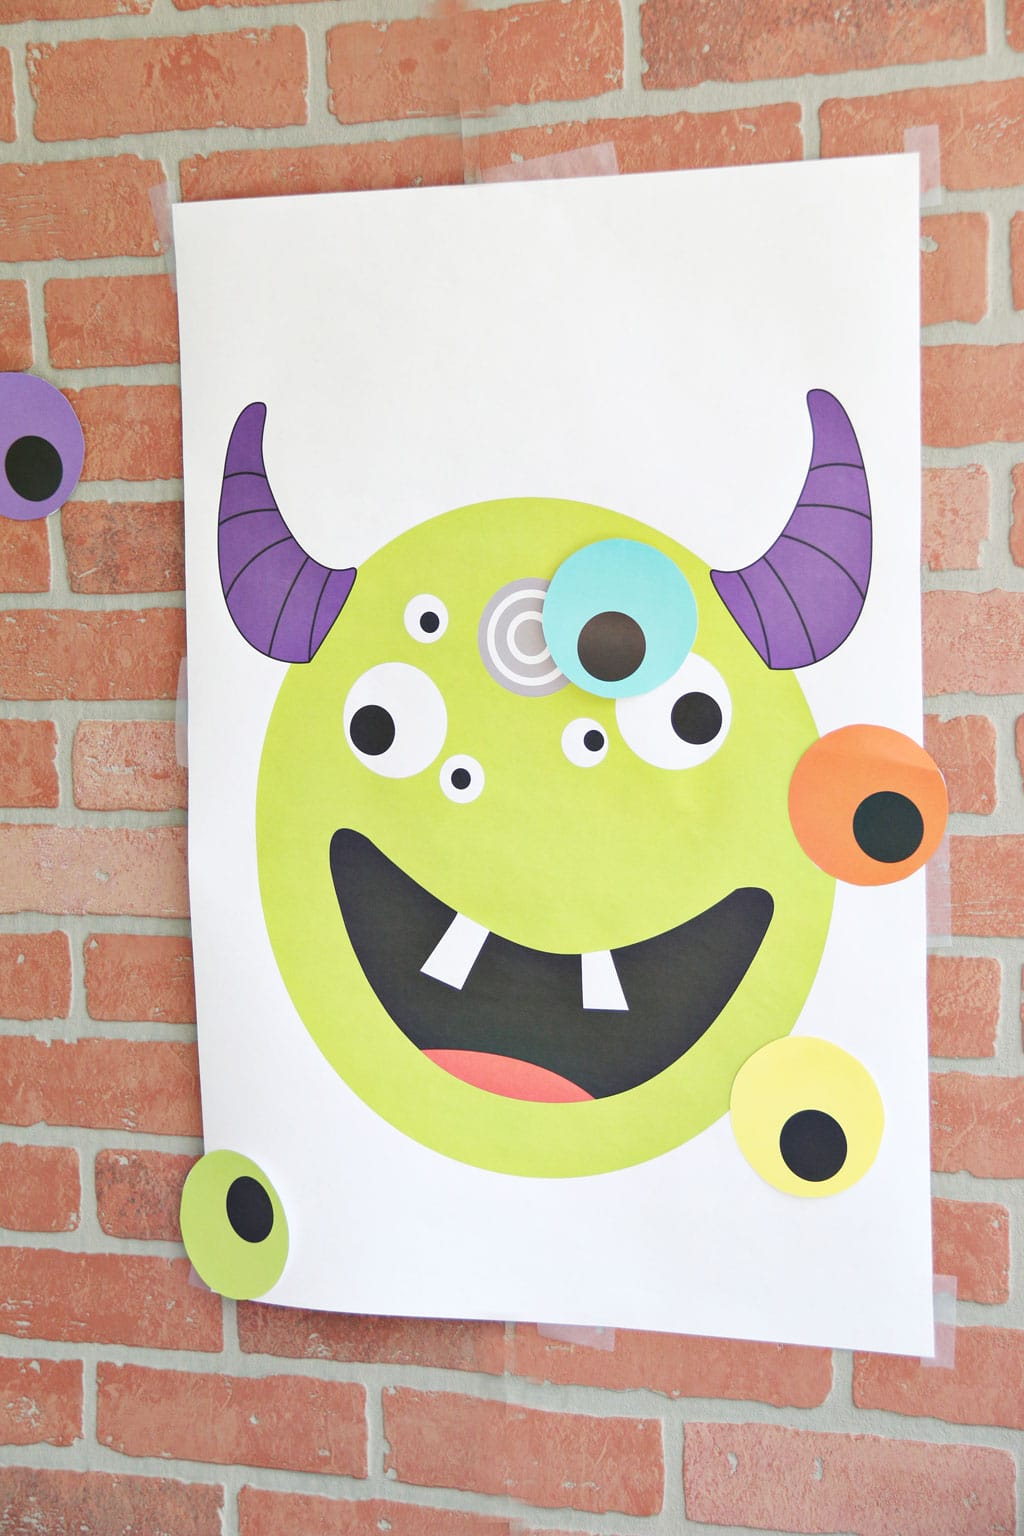 Pin the eye on the monster halloween game for kids